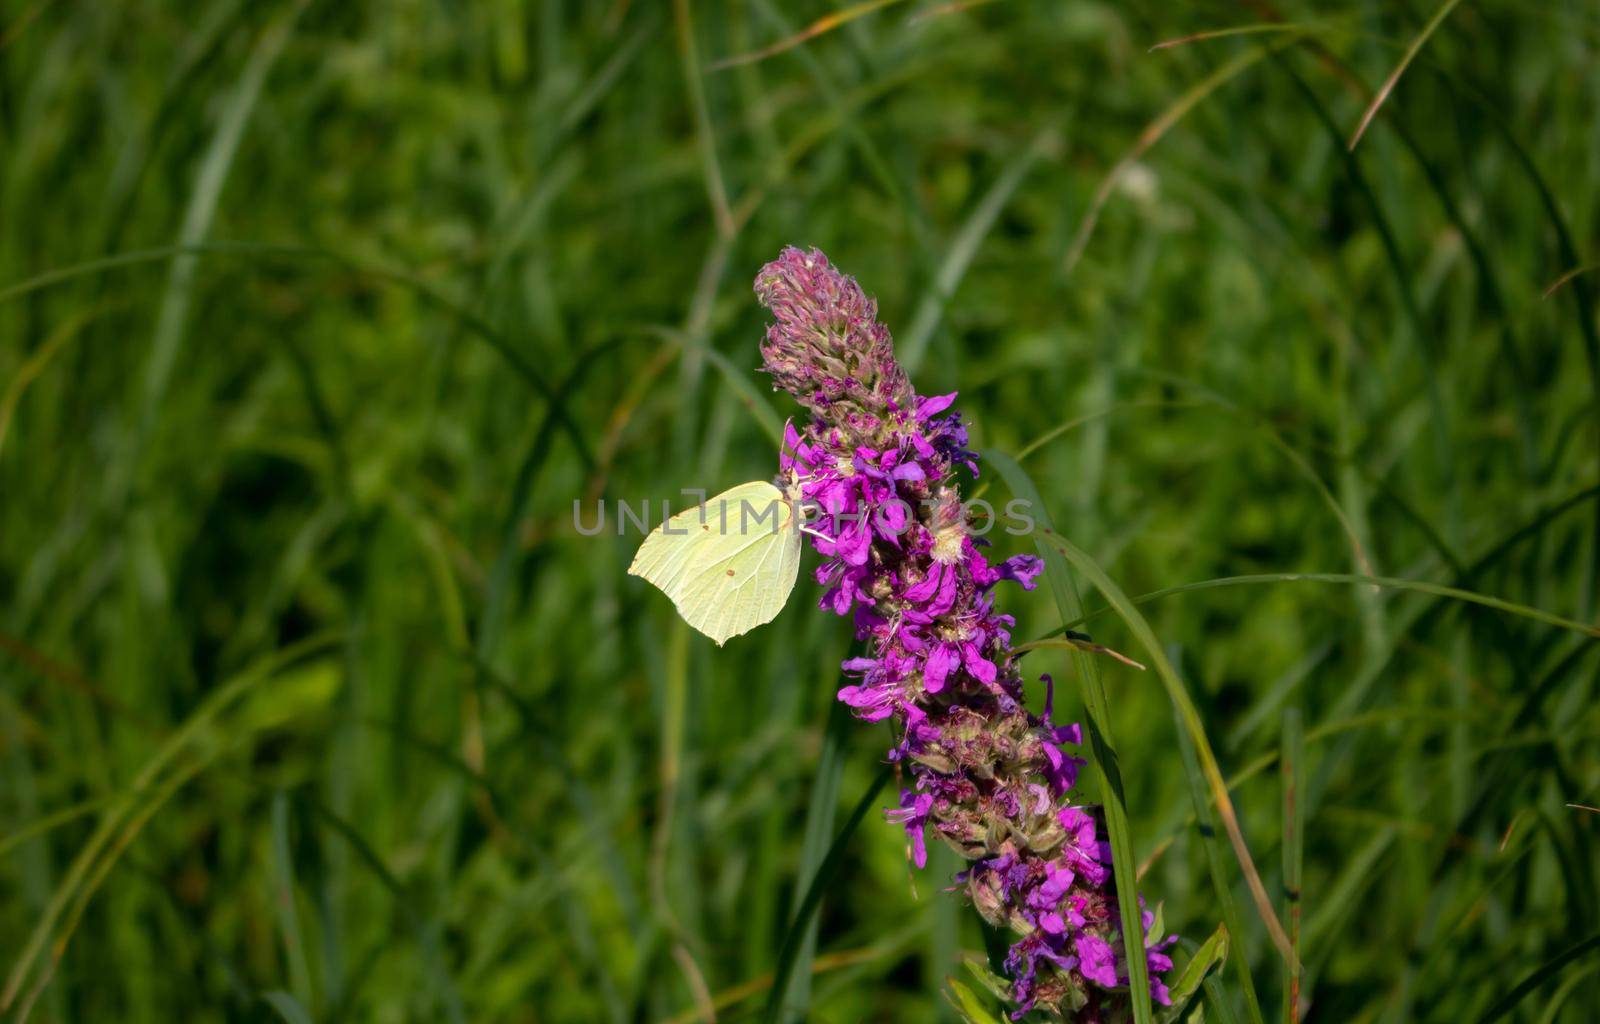 On a bright summer day, a white butterfly on a purple-lilac meadow flower by lapushka62